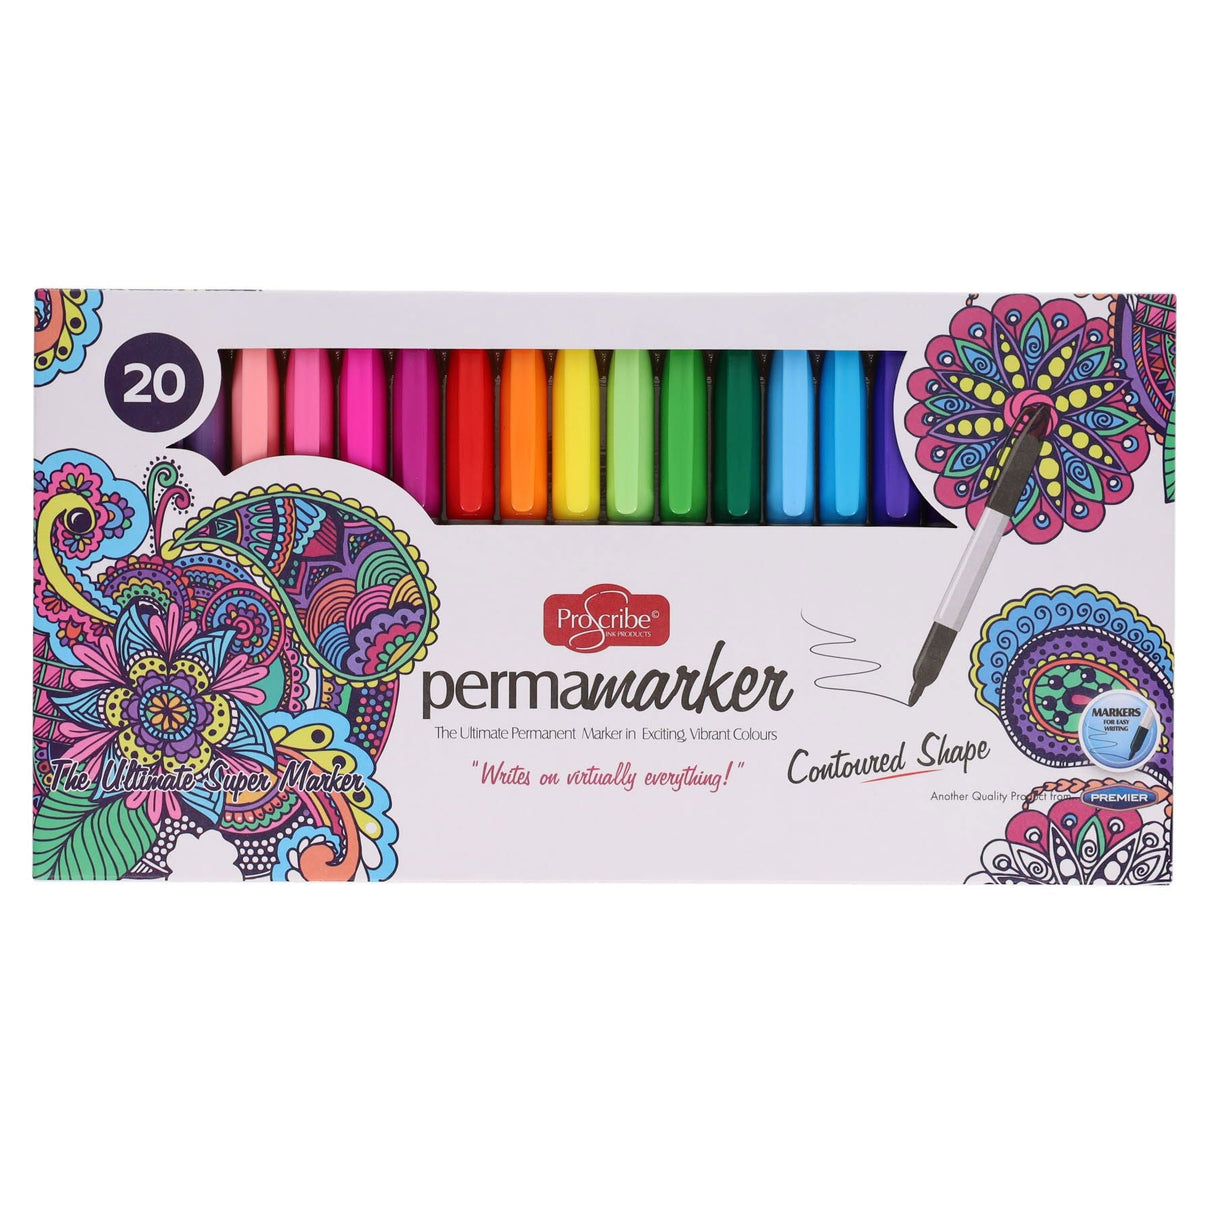 Pro:Scribe Permanent Markers - Pack of 20 | Stationery Shop UK